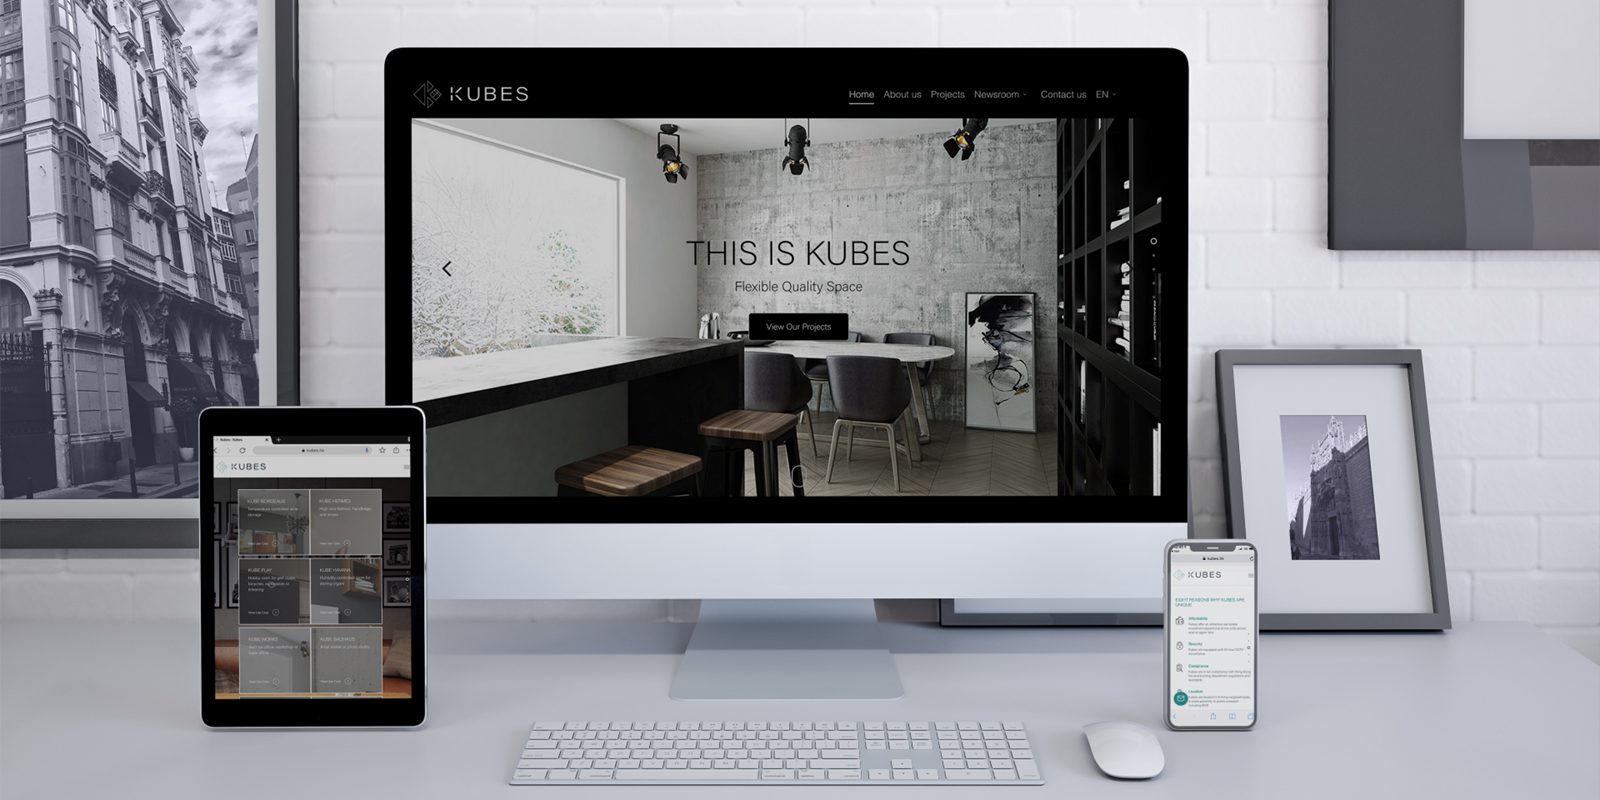 Kubes Branding Project Website On Devices